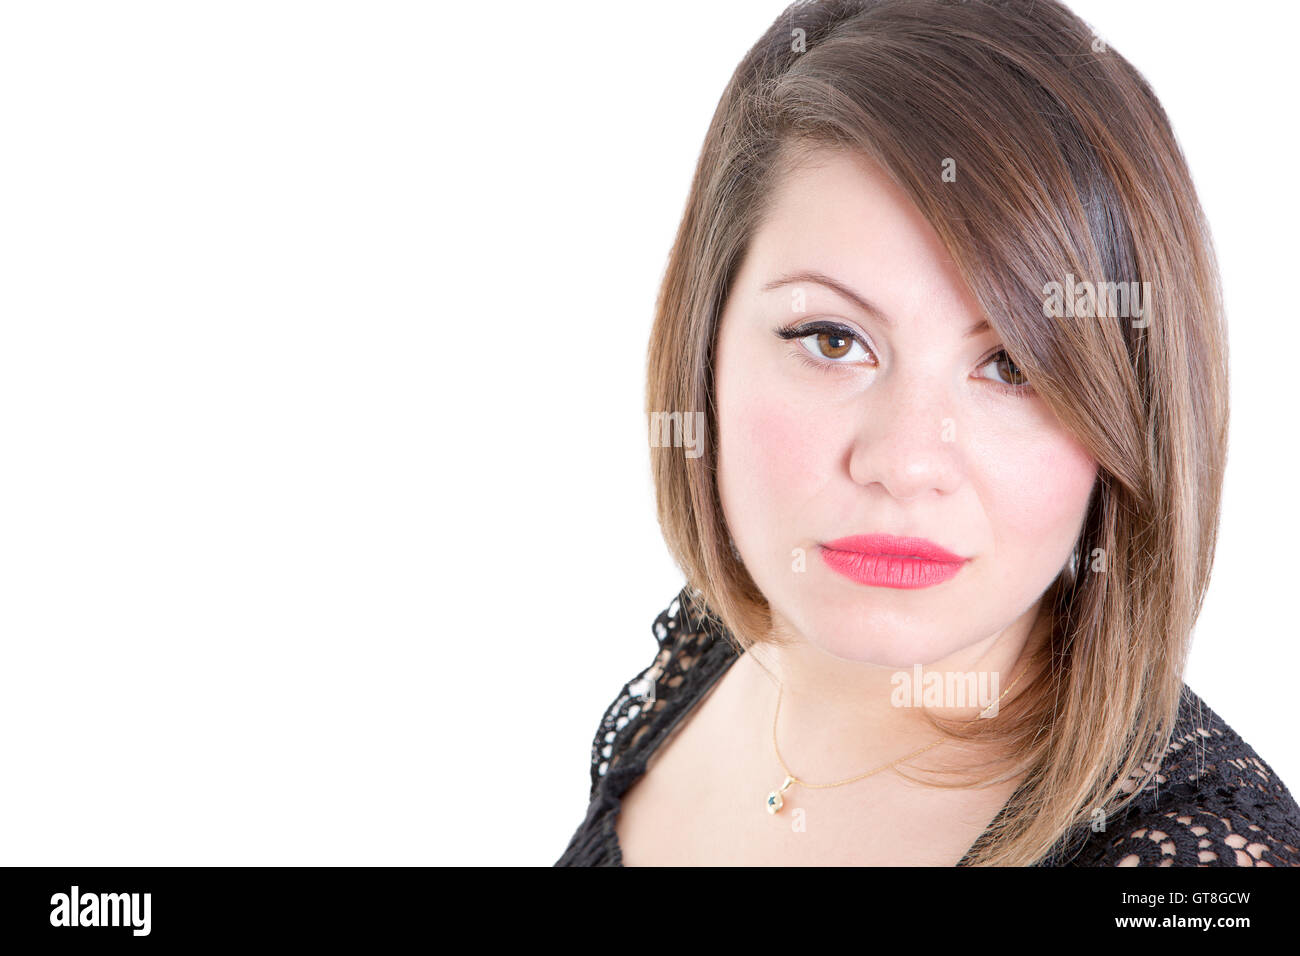 Close up Pretty Young Woman Looking at the Camera Against White Background with Copy Space. Banque D'Images